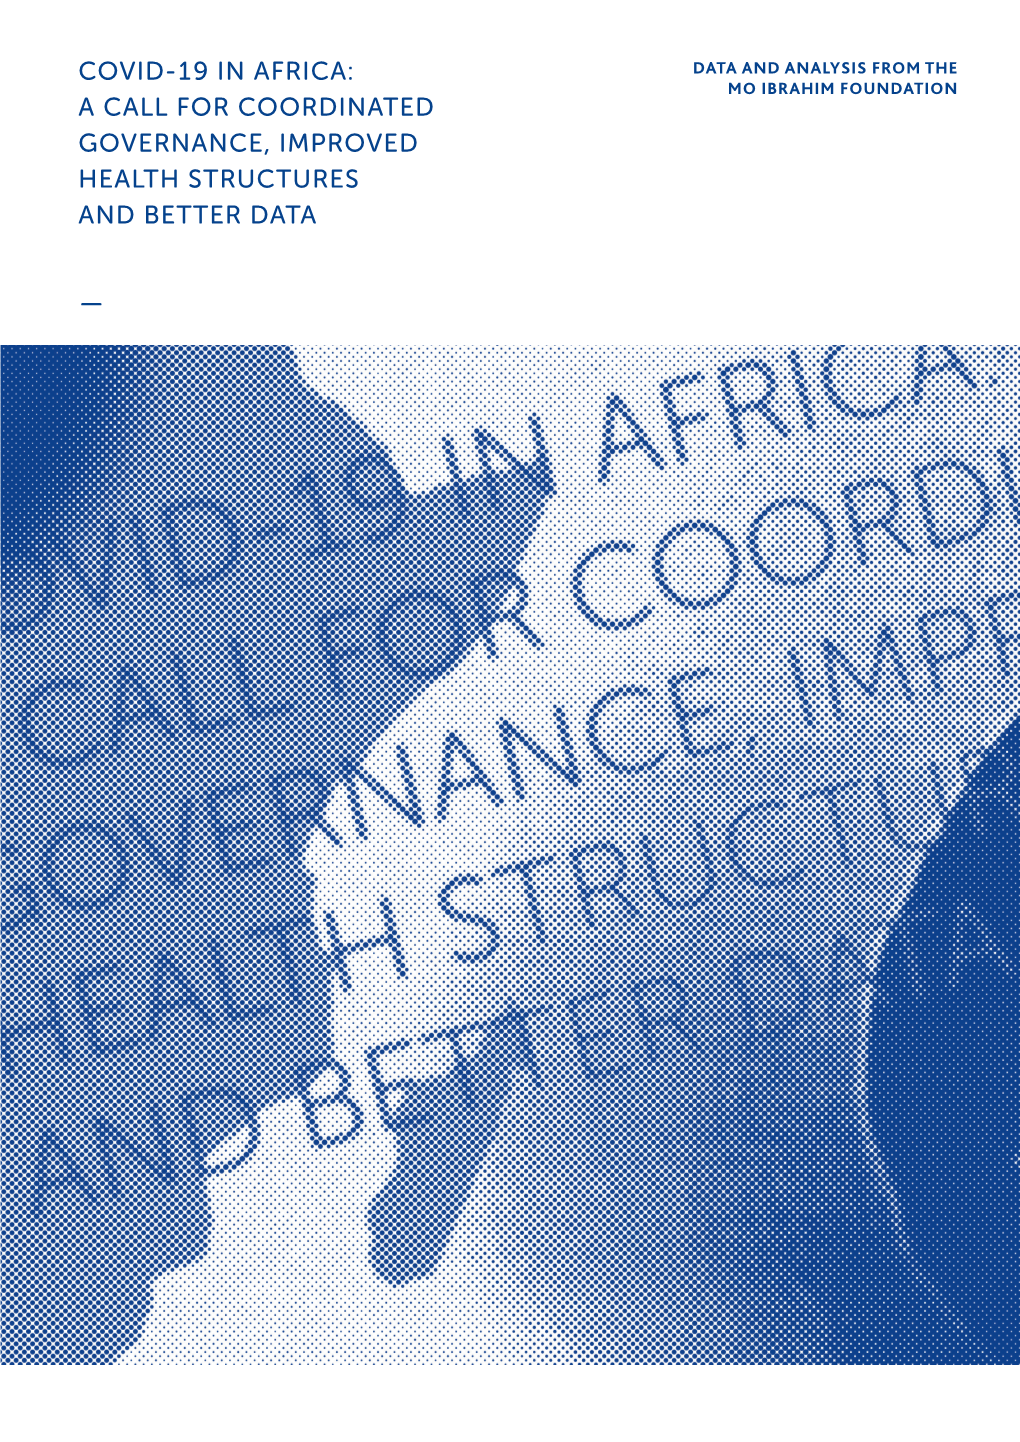 Covid-19 in Africa: a Call for Coordinated Governance, Improved Health Structures and Better Data